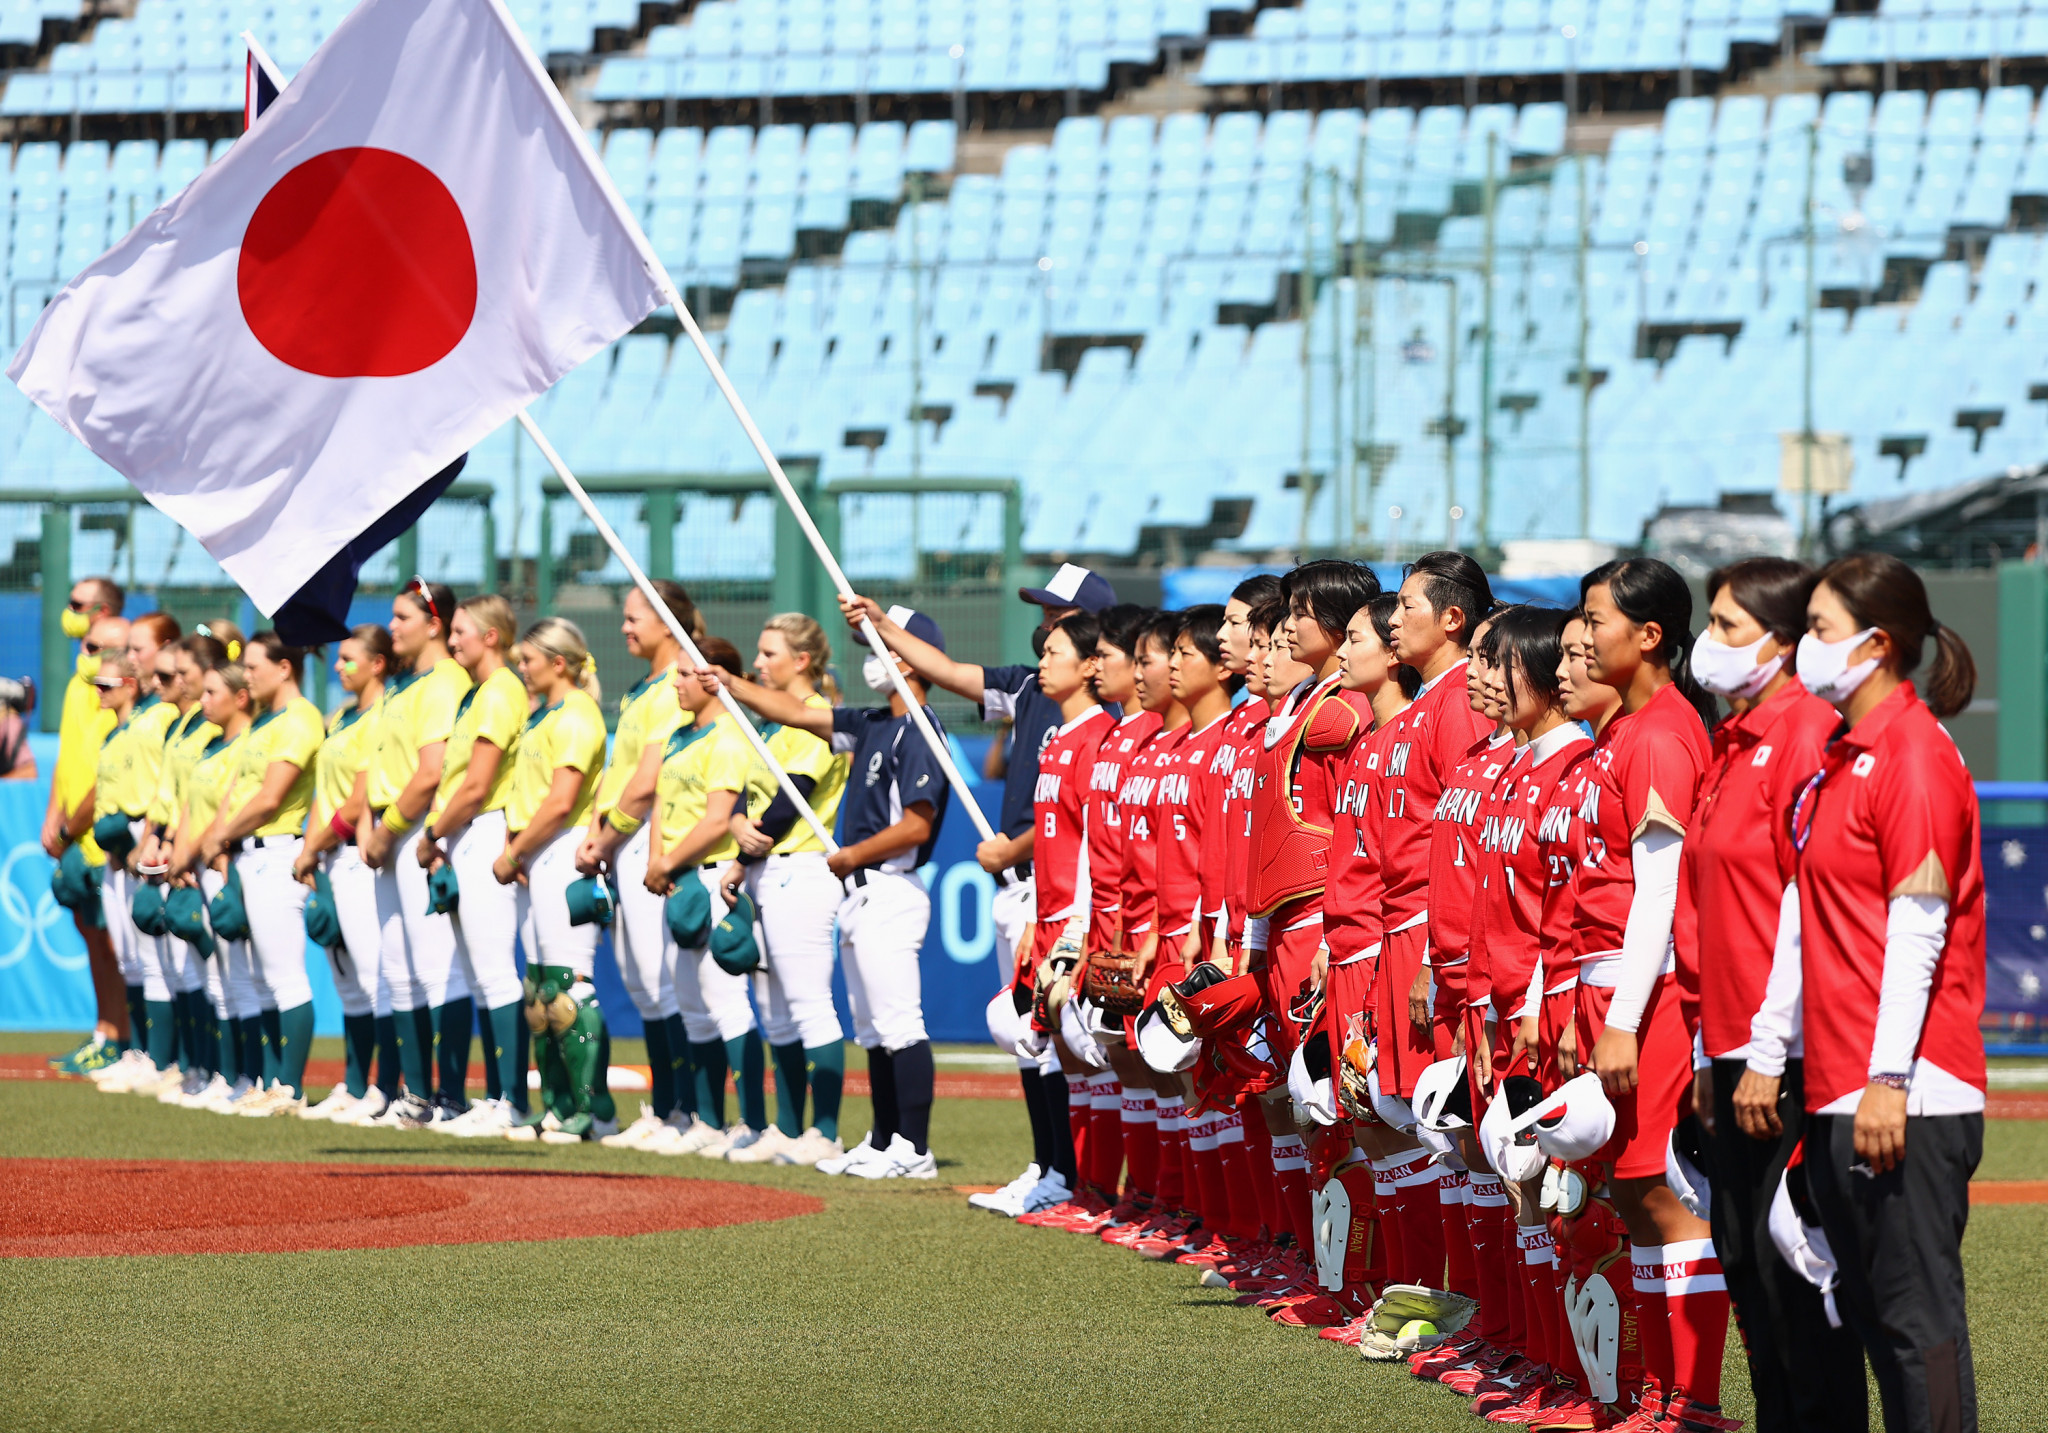 Fukushima hosted some softball matches during Tokyo 2020, but fans were banned ©Getty Images